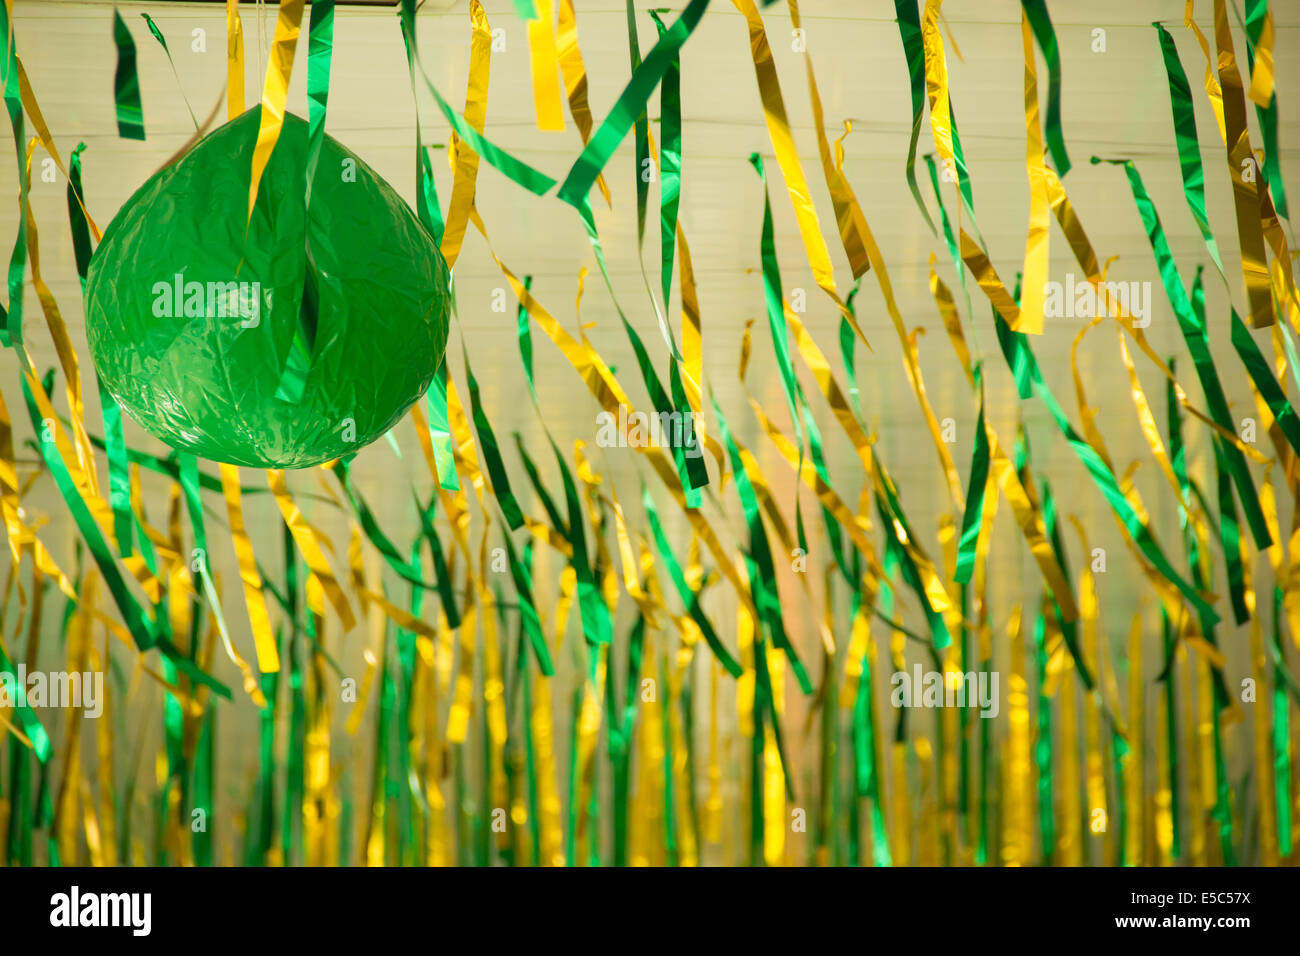 Metallic Ribbons with the main colors of the Brazilian Flag. Stock Photo